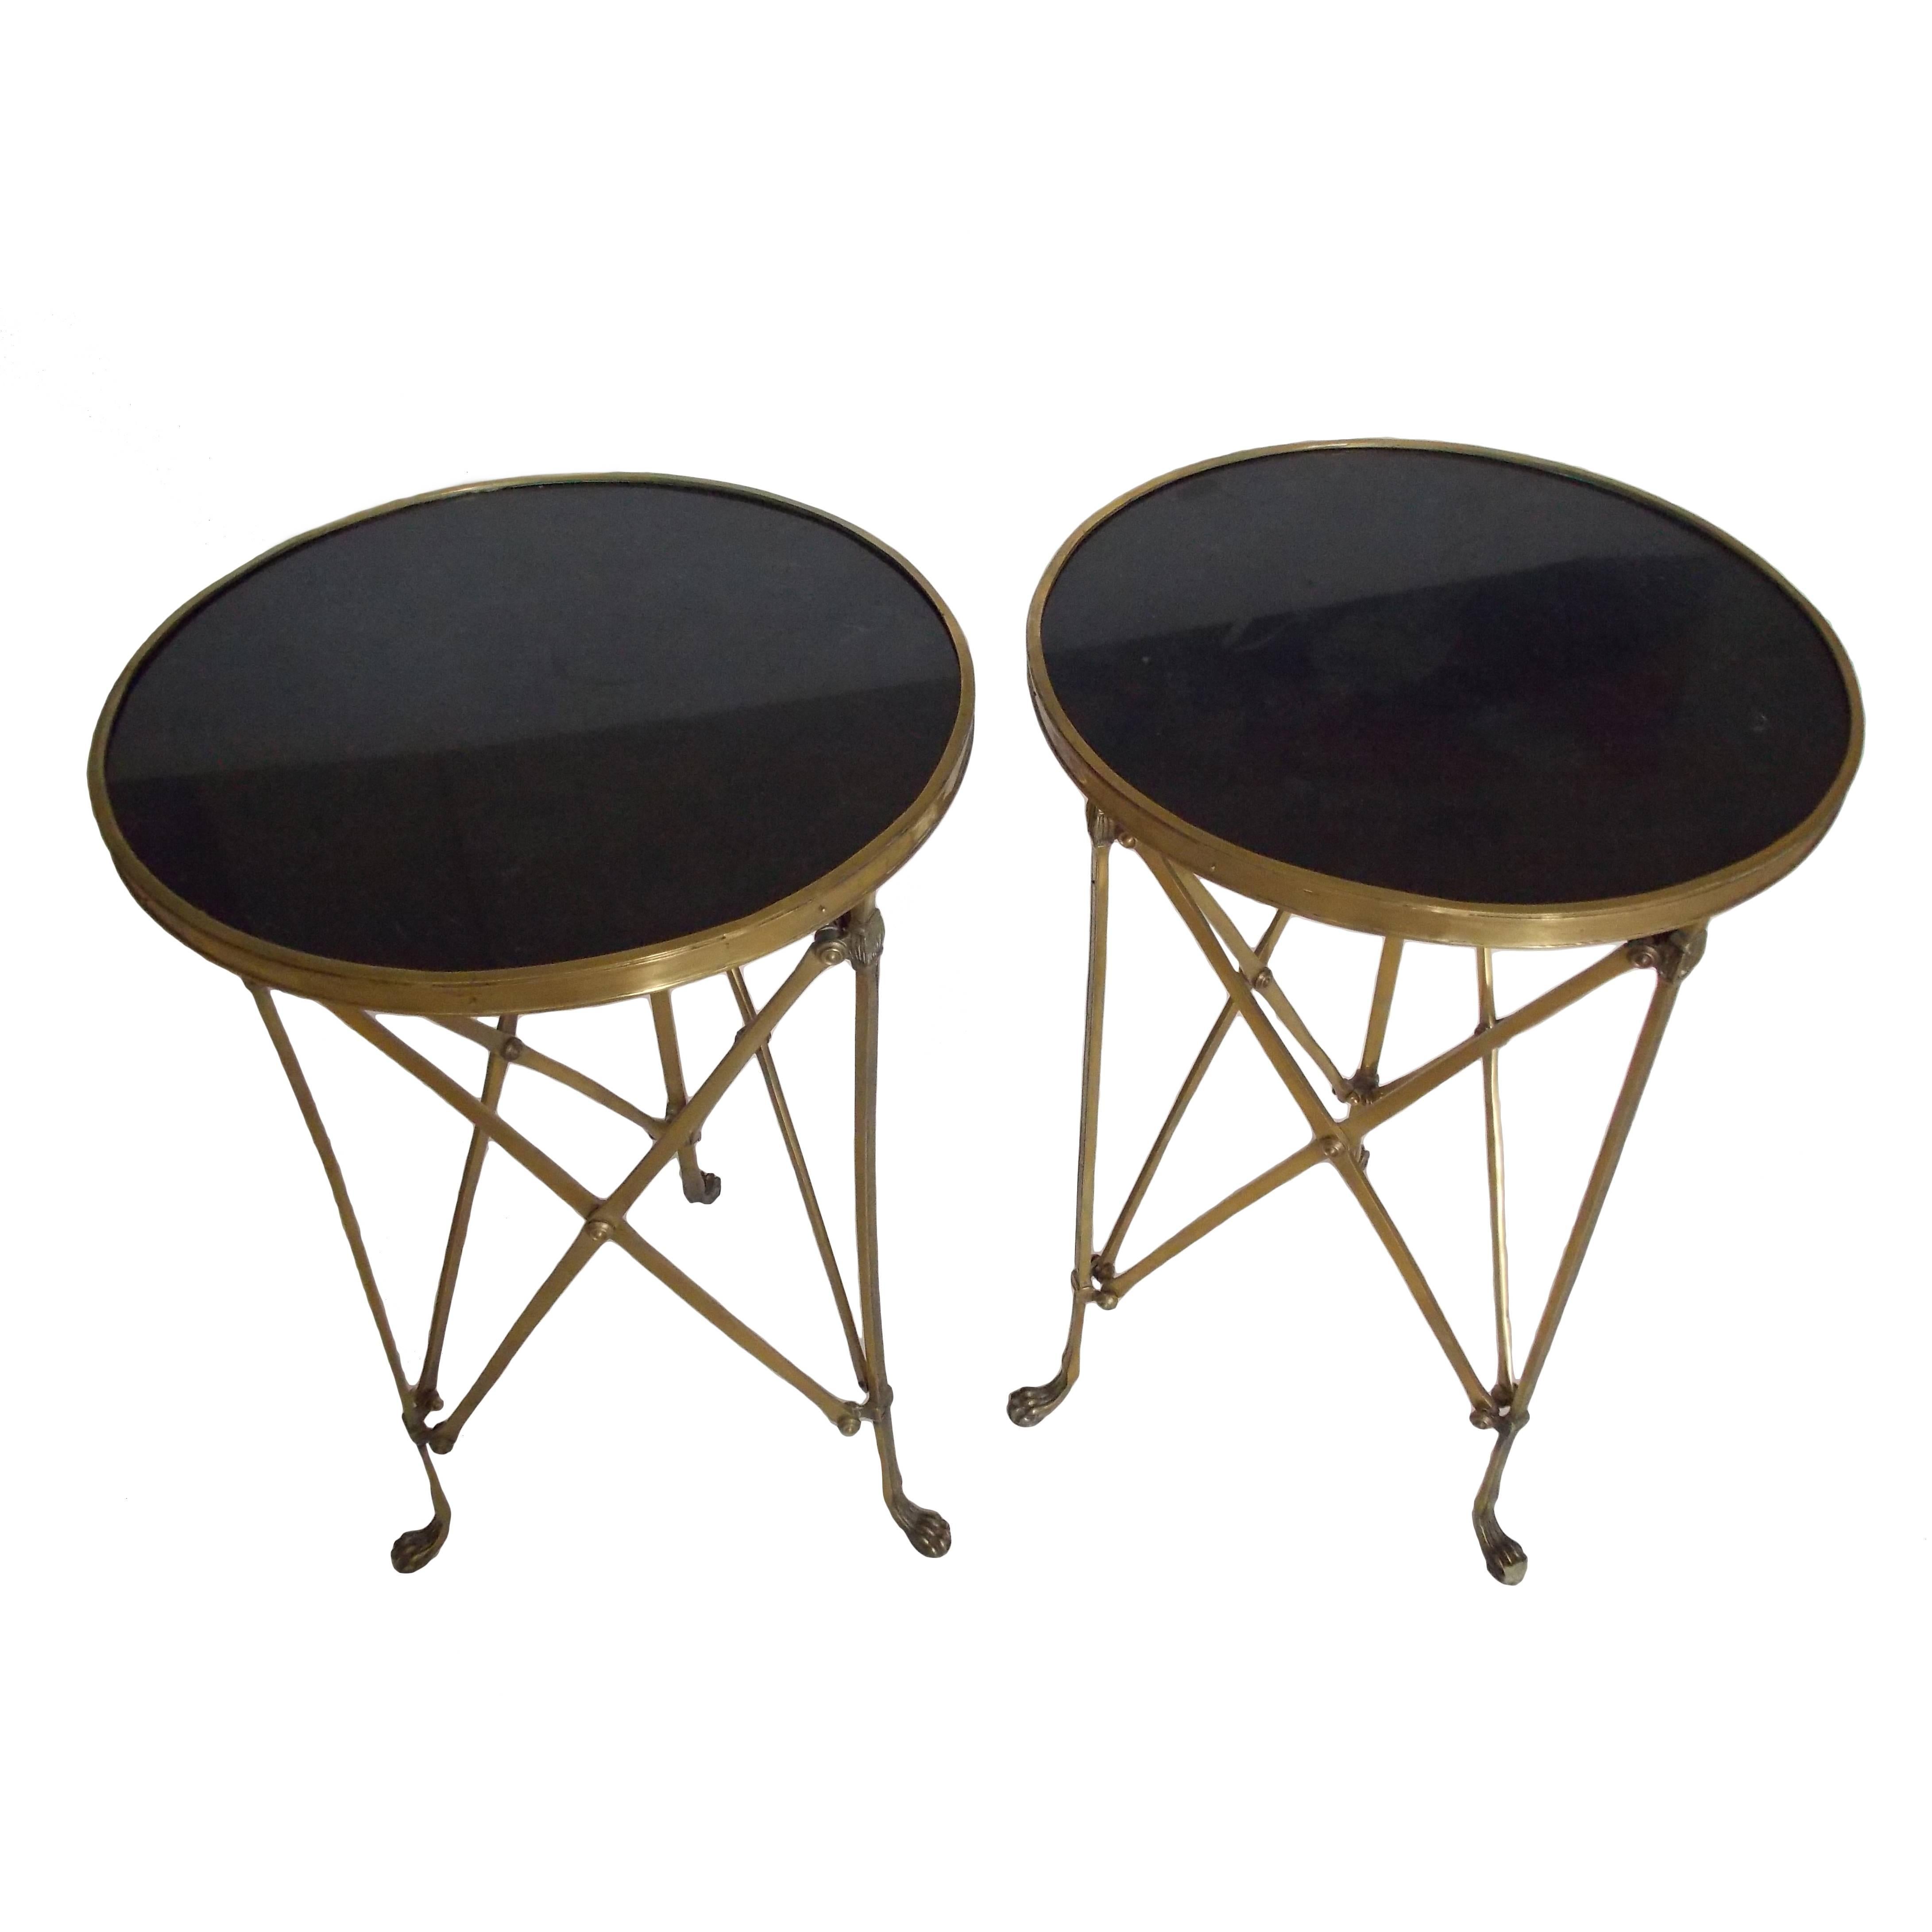 A stunning Mid-Century pair of French gueridon tables with black granite tops.
The brass bases have vertical cross stretchers joined by a medallion in the center and rest upon cat paw feet.